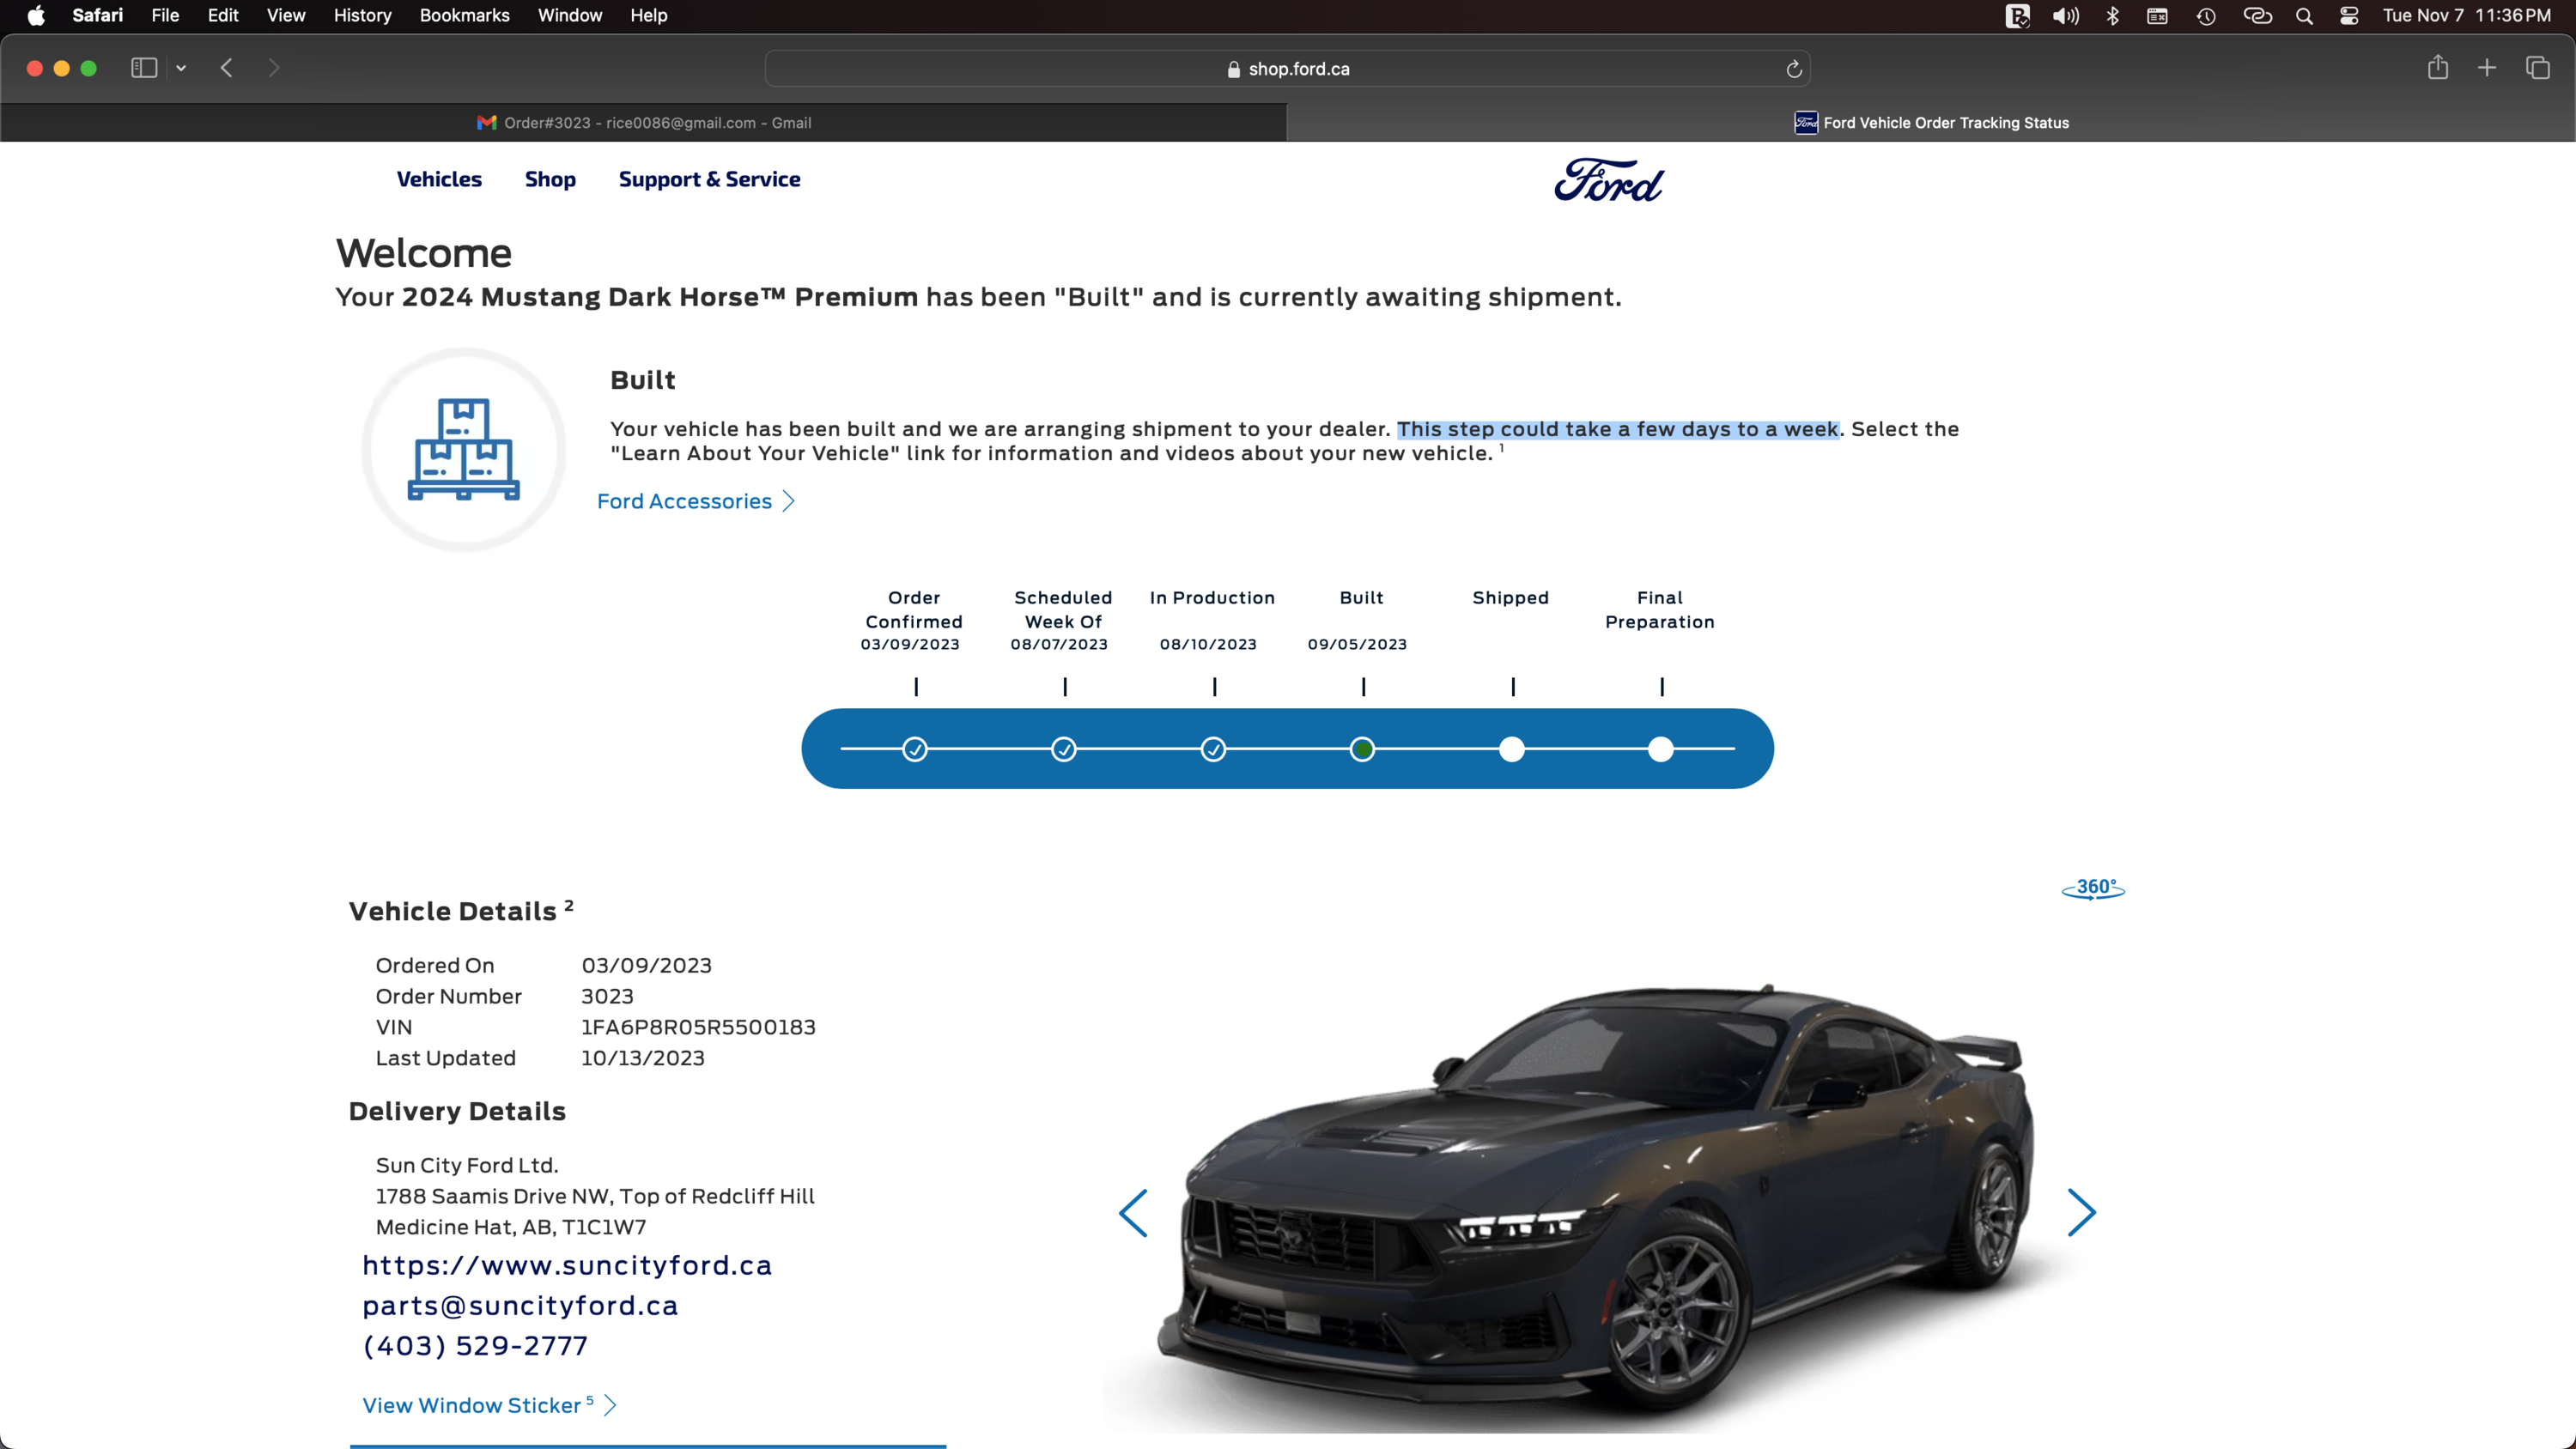 S650 Mustang BUILT & SHIPPED !! Tracker update 2023: What's your status? Screenshot 2023-11-07 at 11.36.58 PM